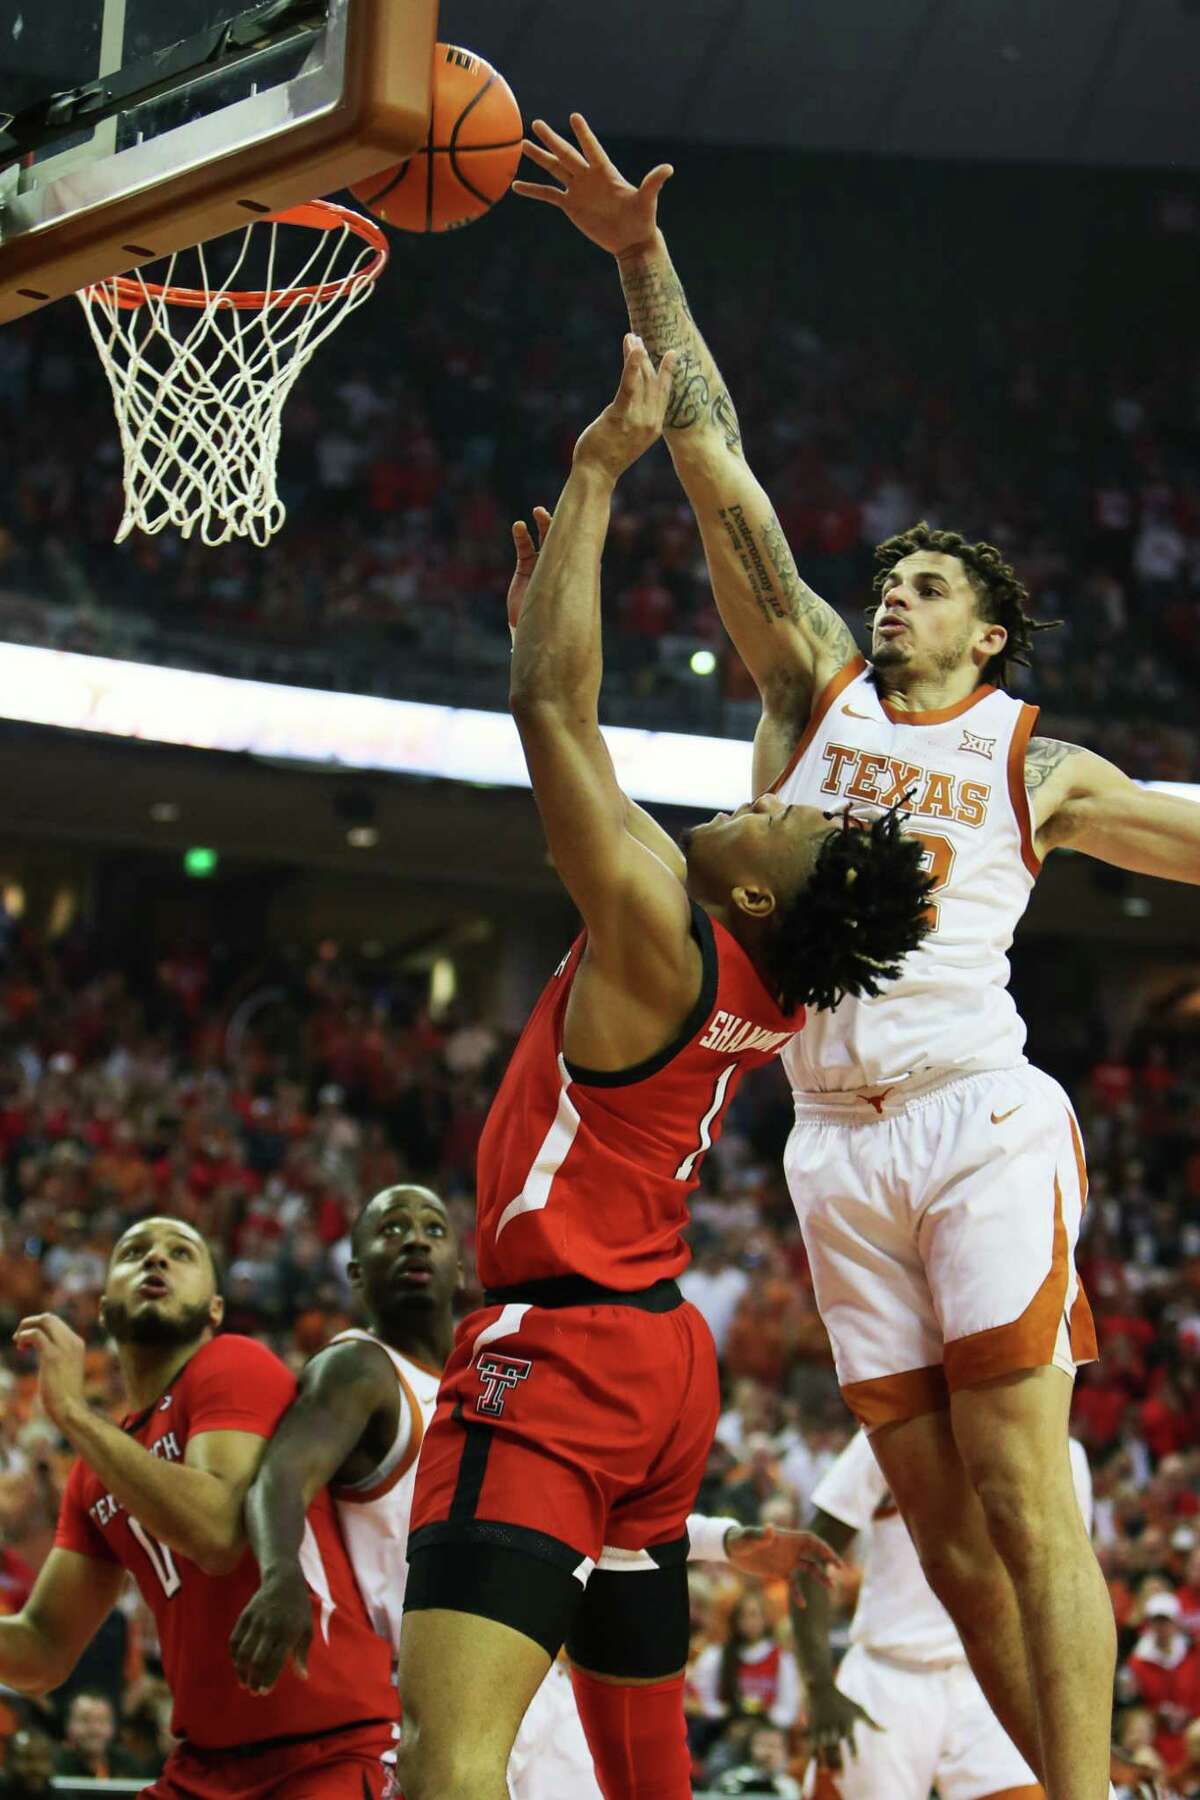 Texas Longhorns forward Christian Bishop (32) defends the shot of Texas Tech Red Raiders guard Terrence Shannon Jr. (1) during the Big 12 basketball game against the Texas Tech Red Raiders Saturday, Feb. 19, 2022, at The Frank Erwin Center in Austin, Texas. [Sam Grenadier/San Antonio Express-News]